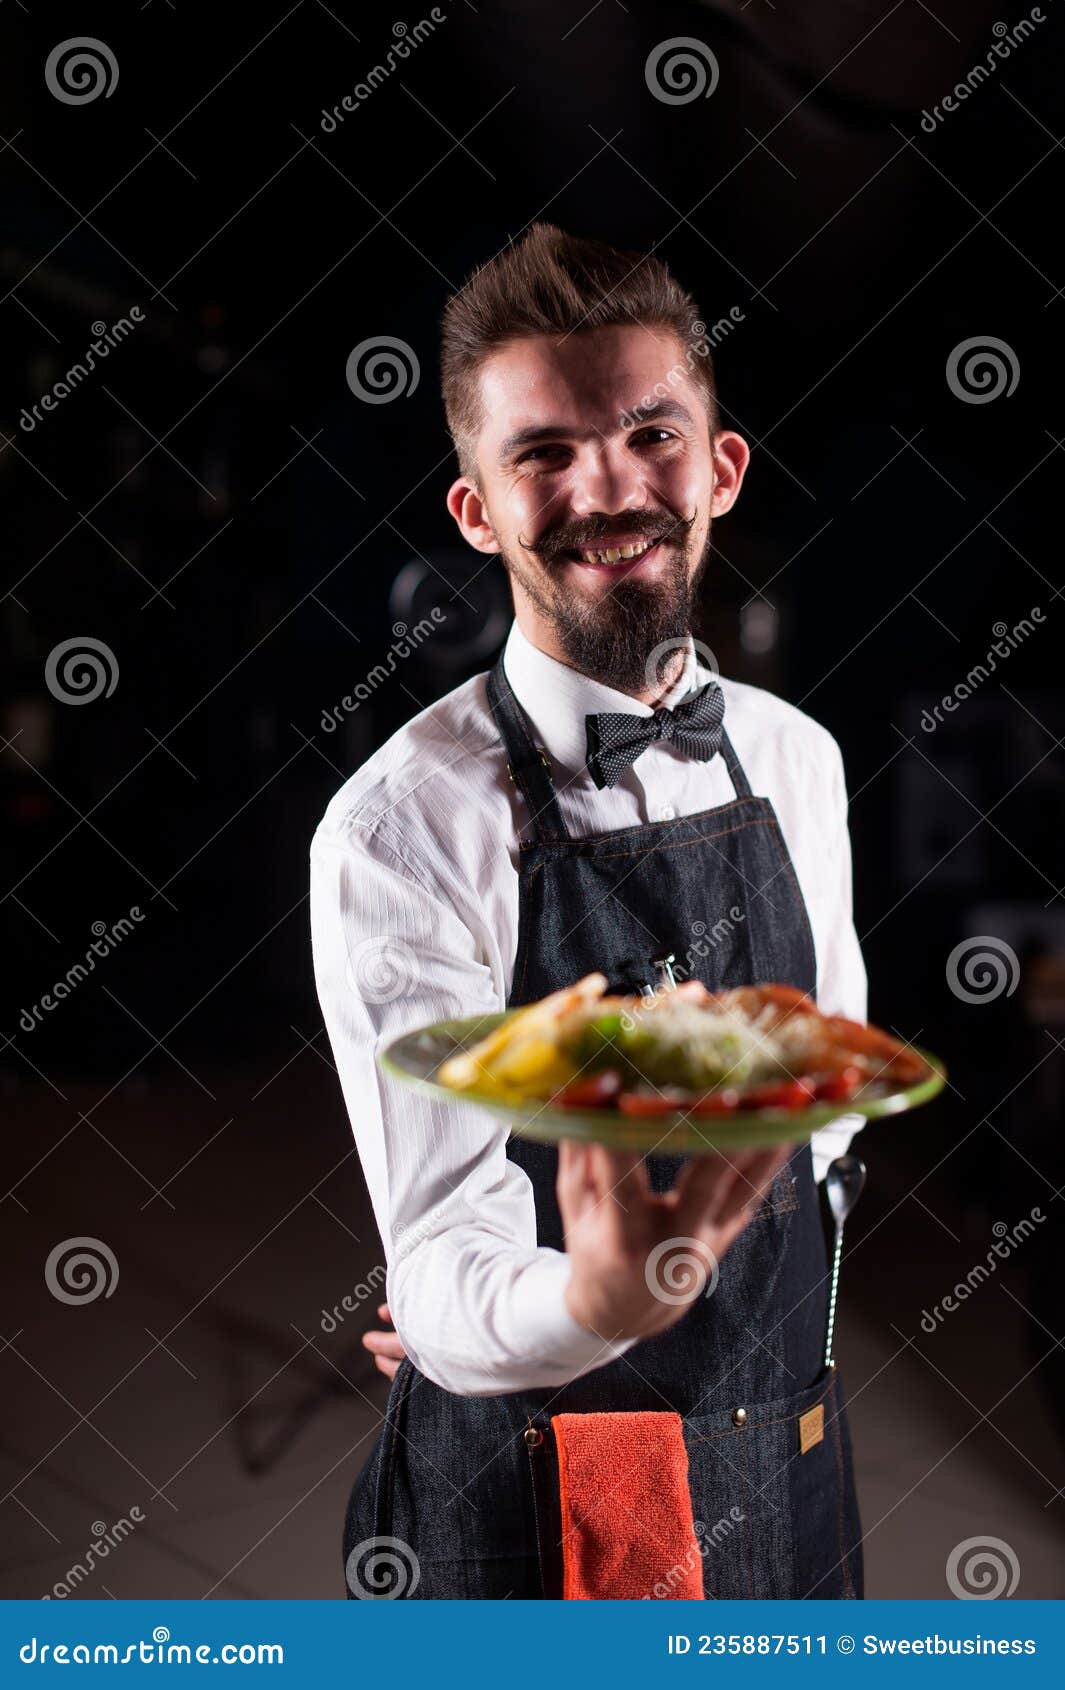 professional garcon holds salad on a black background.